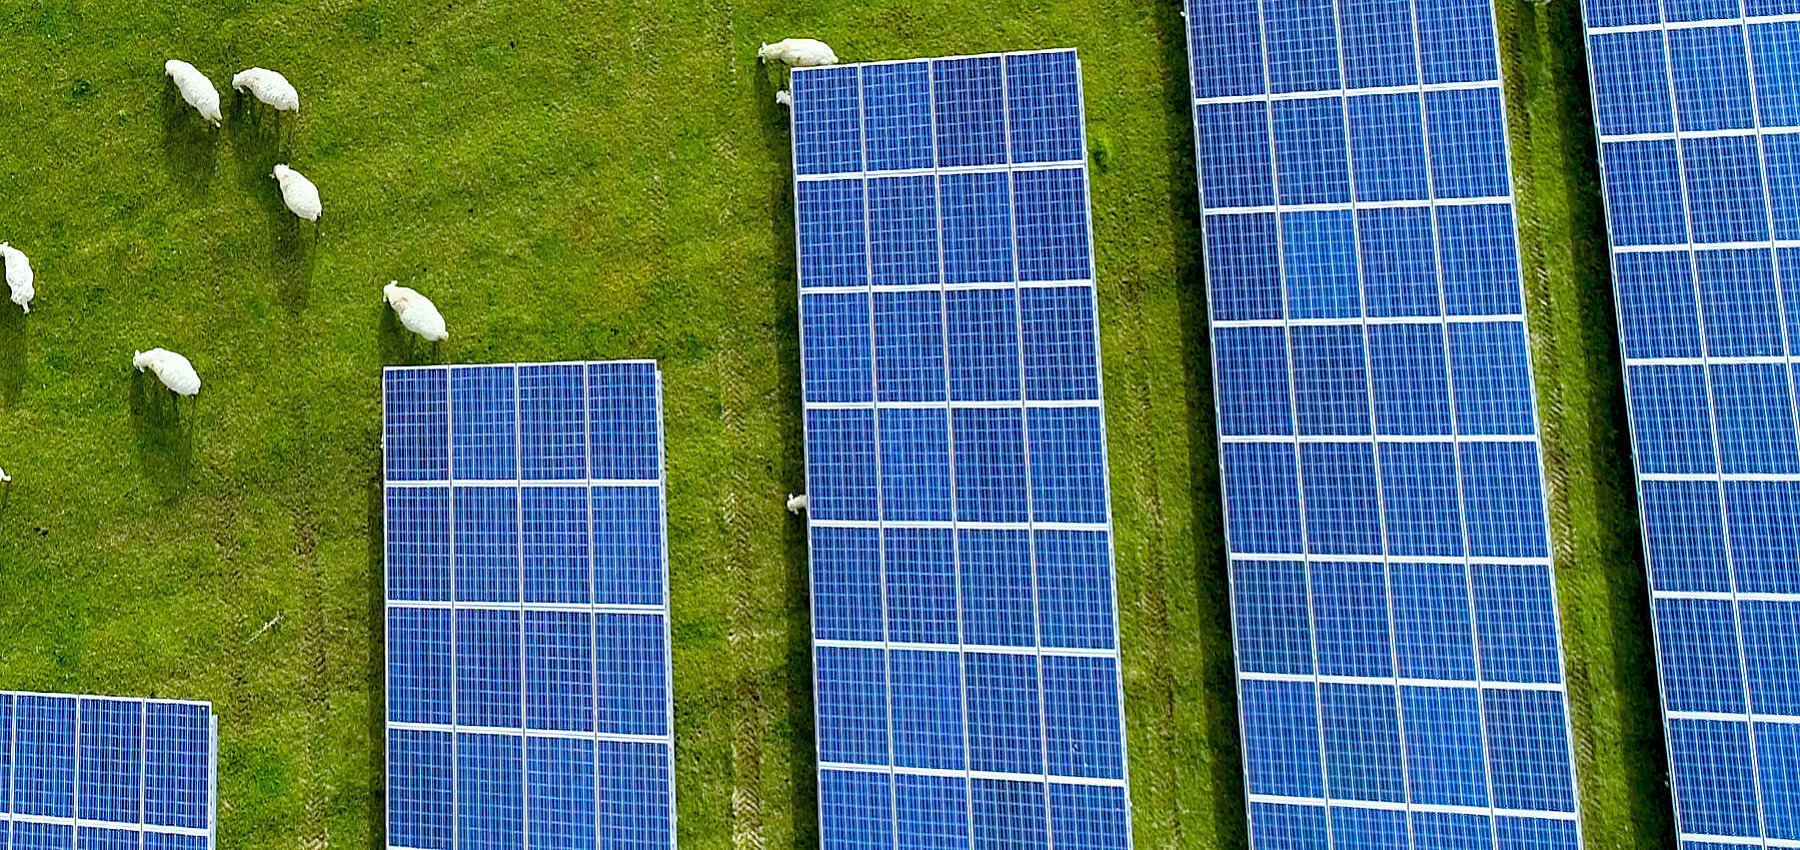 Birdseye view of solar panels and sheep in a field